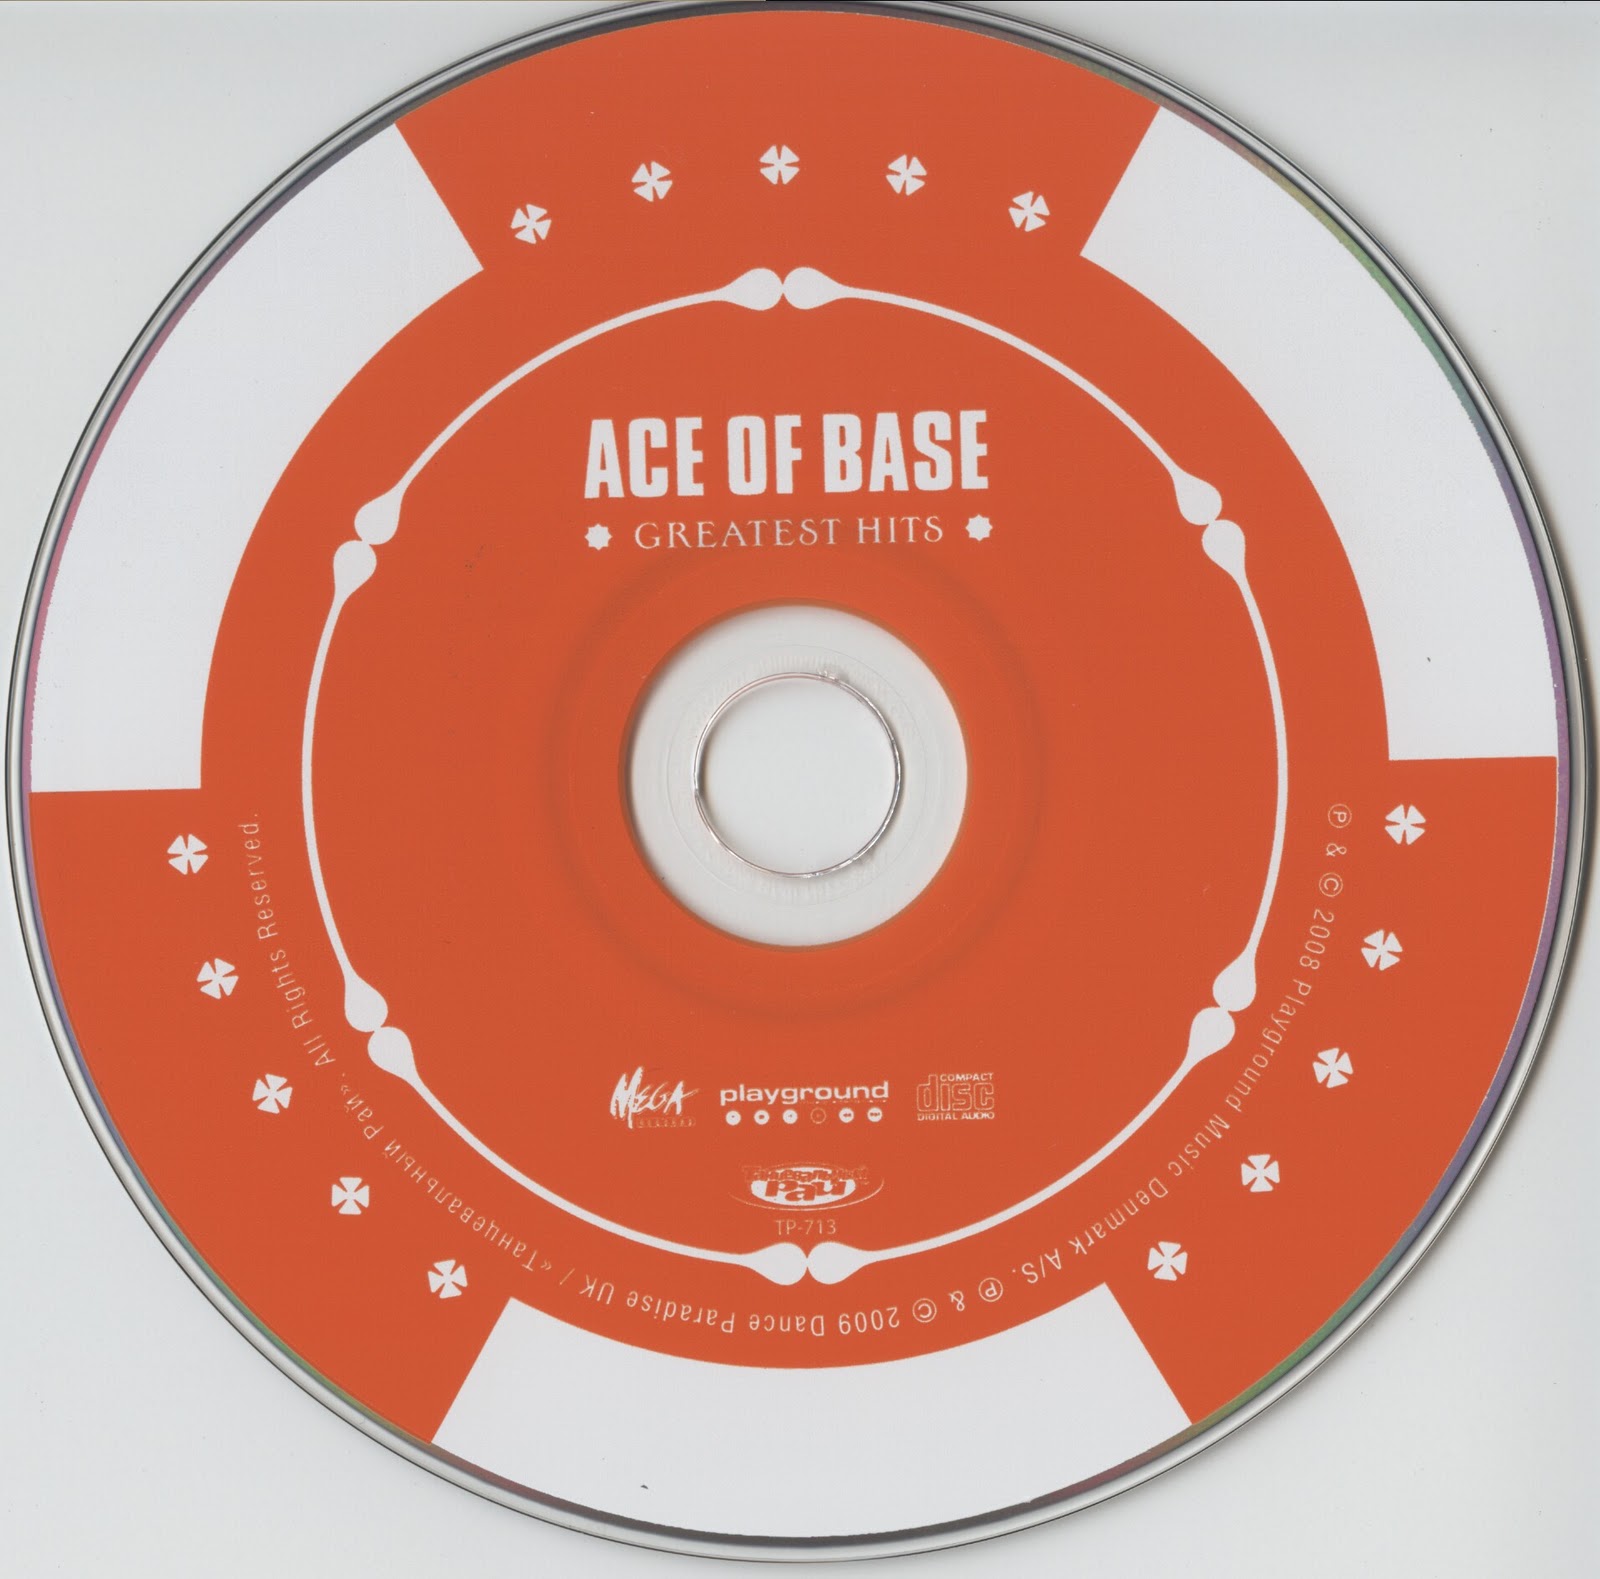 Beautiful life ace. Ace of Base диски. Ace of Base Greatest Hits. Ace of Base 2008. Ace of Base обложка DVD.